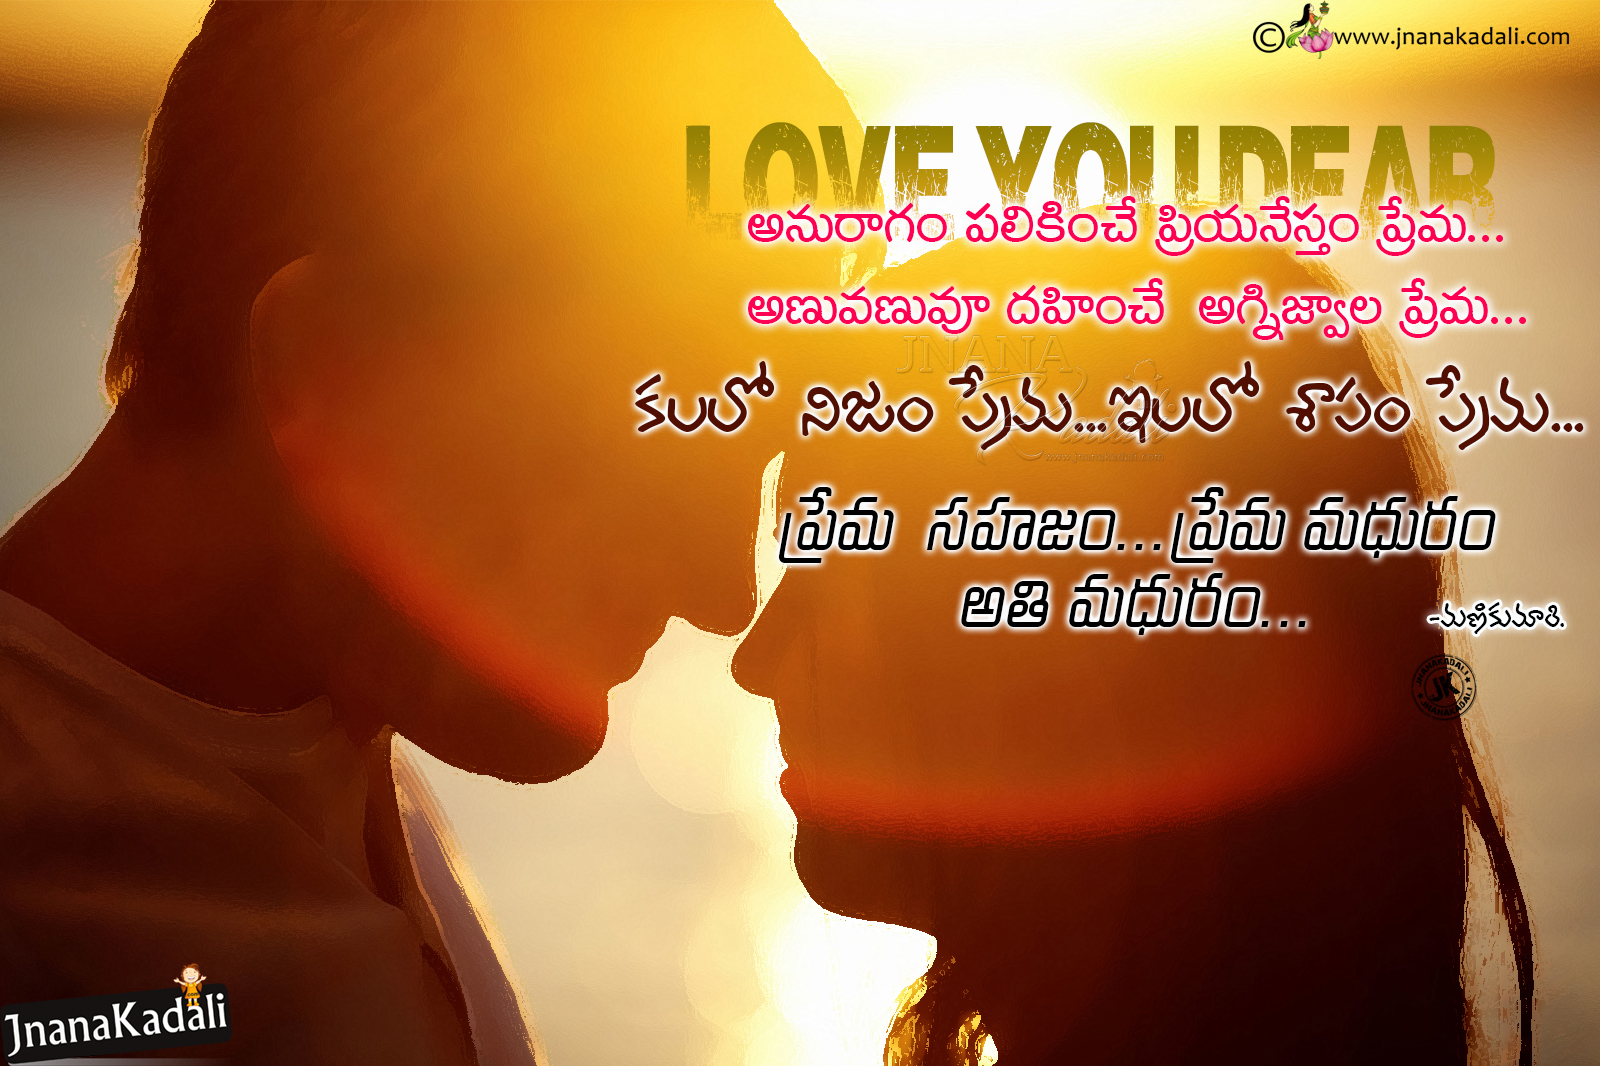 Telugu heart touching alone love quotes quotesaddacom inspiring love quotes...